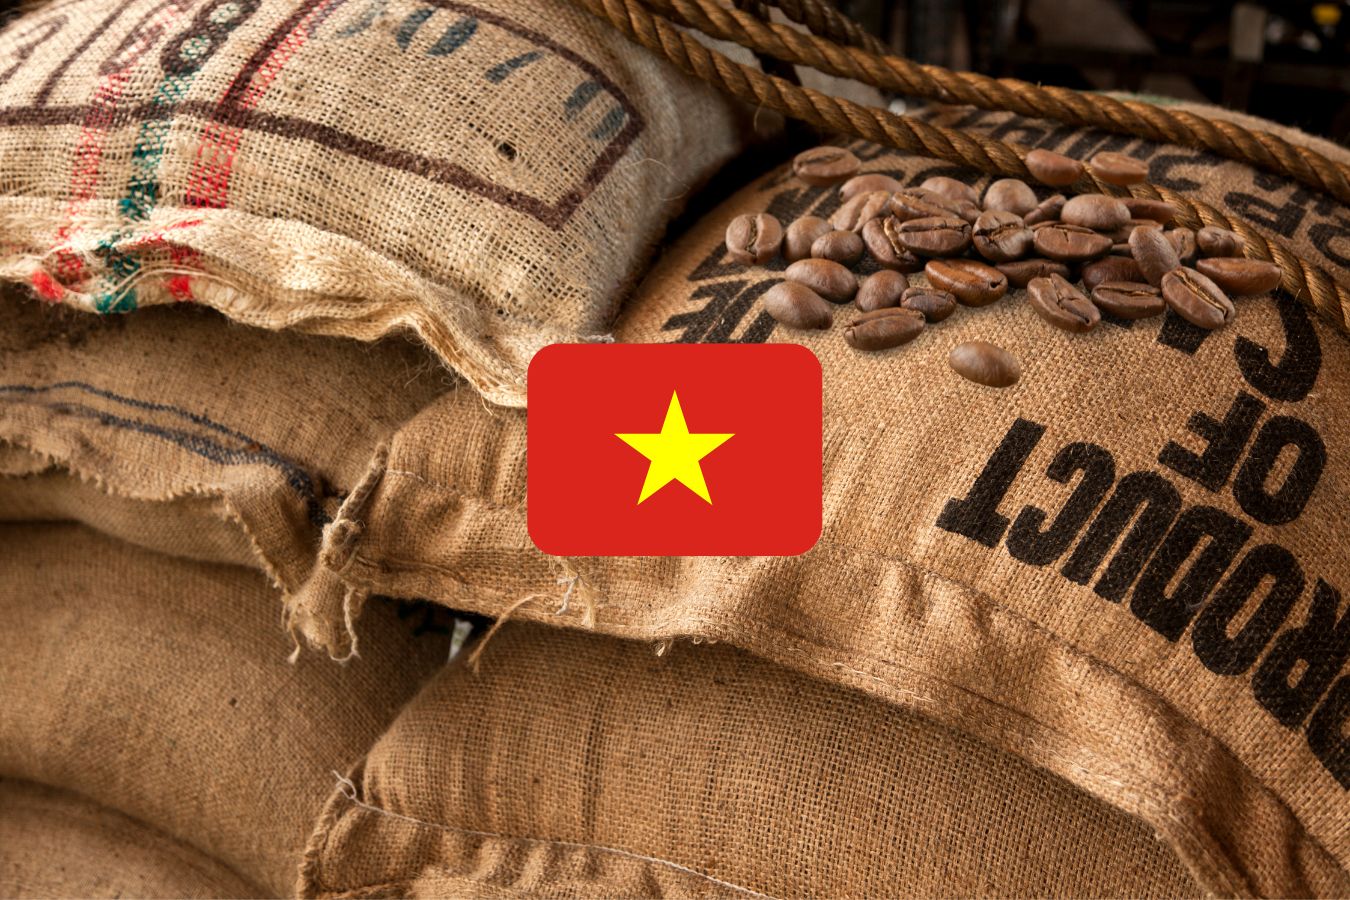 How to buy coffee from Vietnam